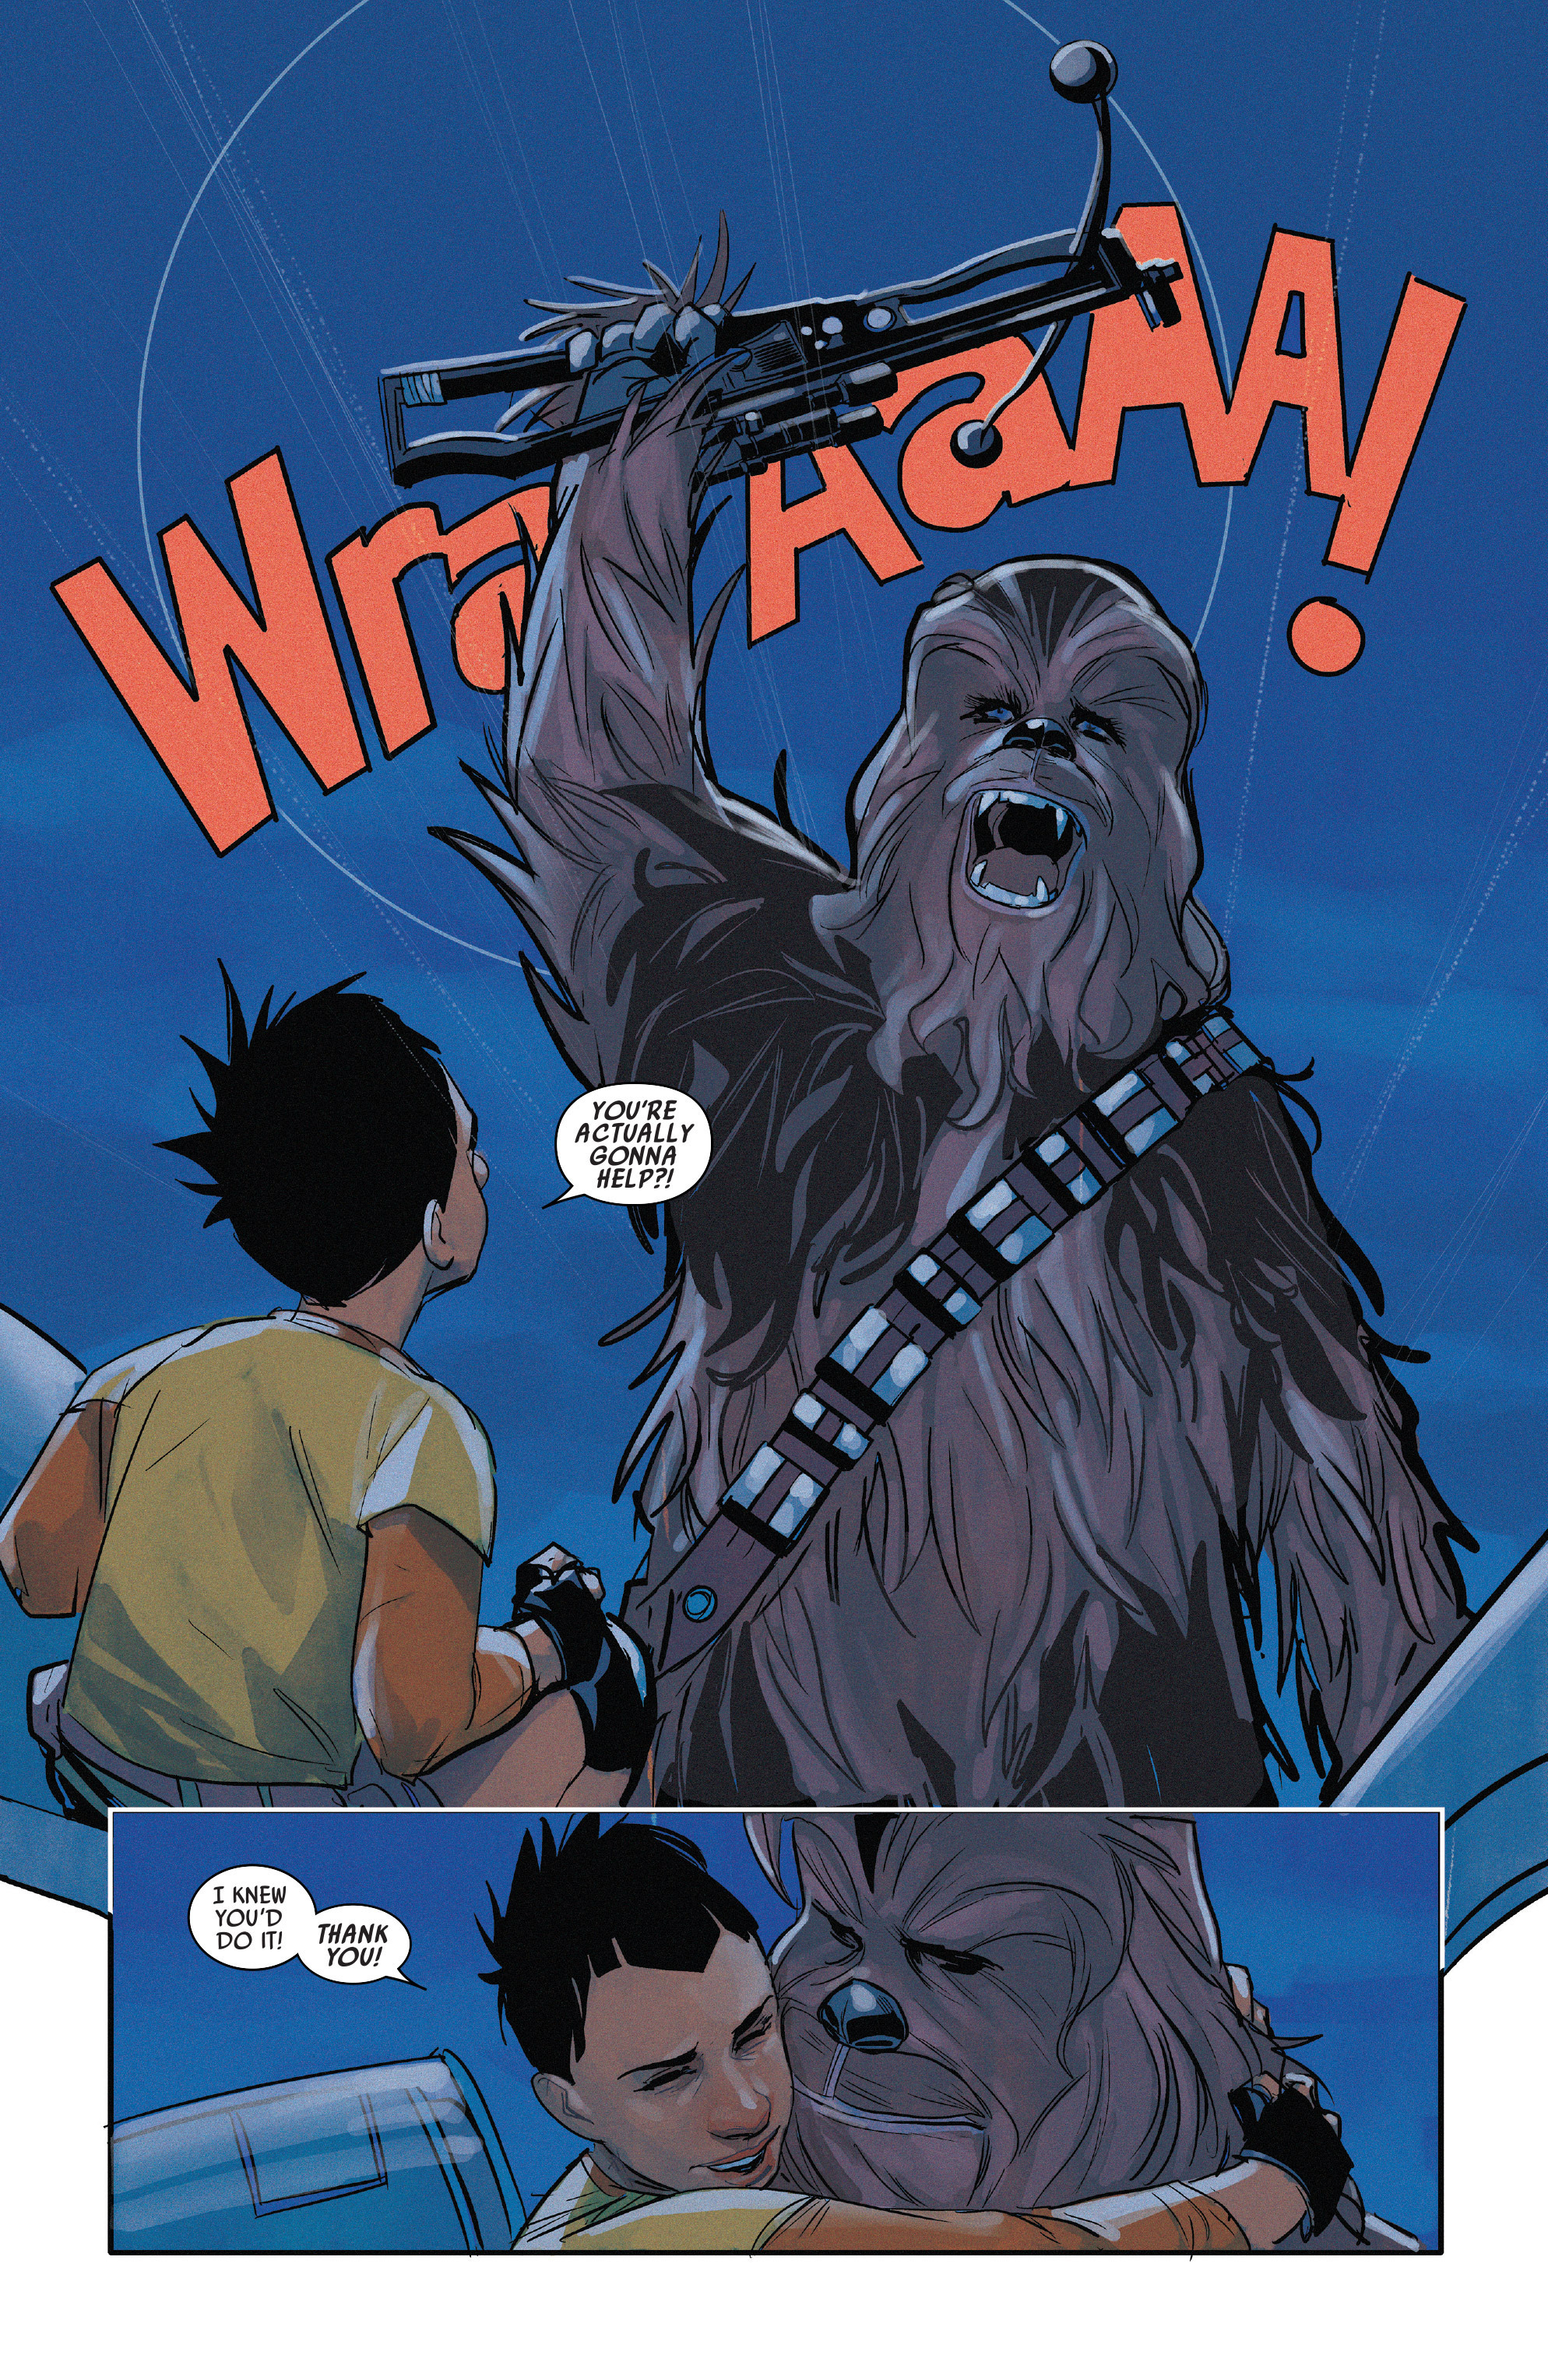 Read online Chewbacca comic -  Issue #1 - 21